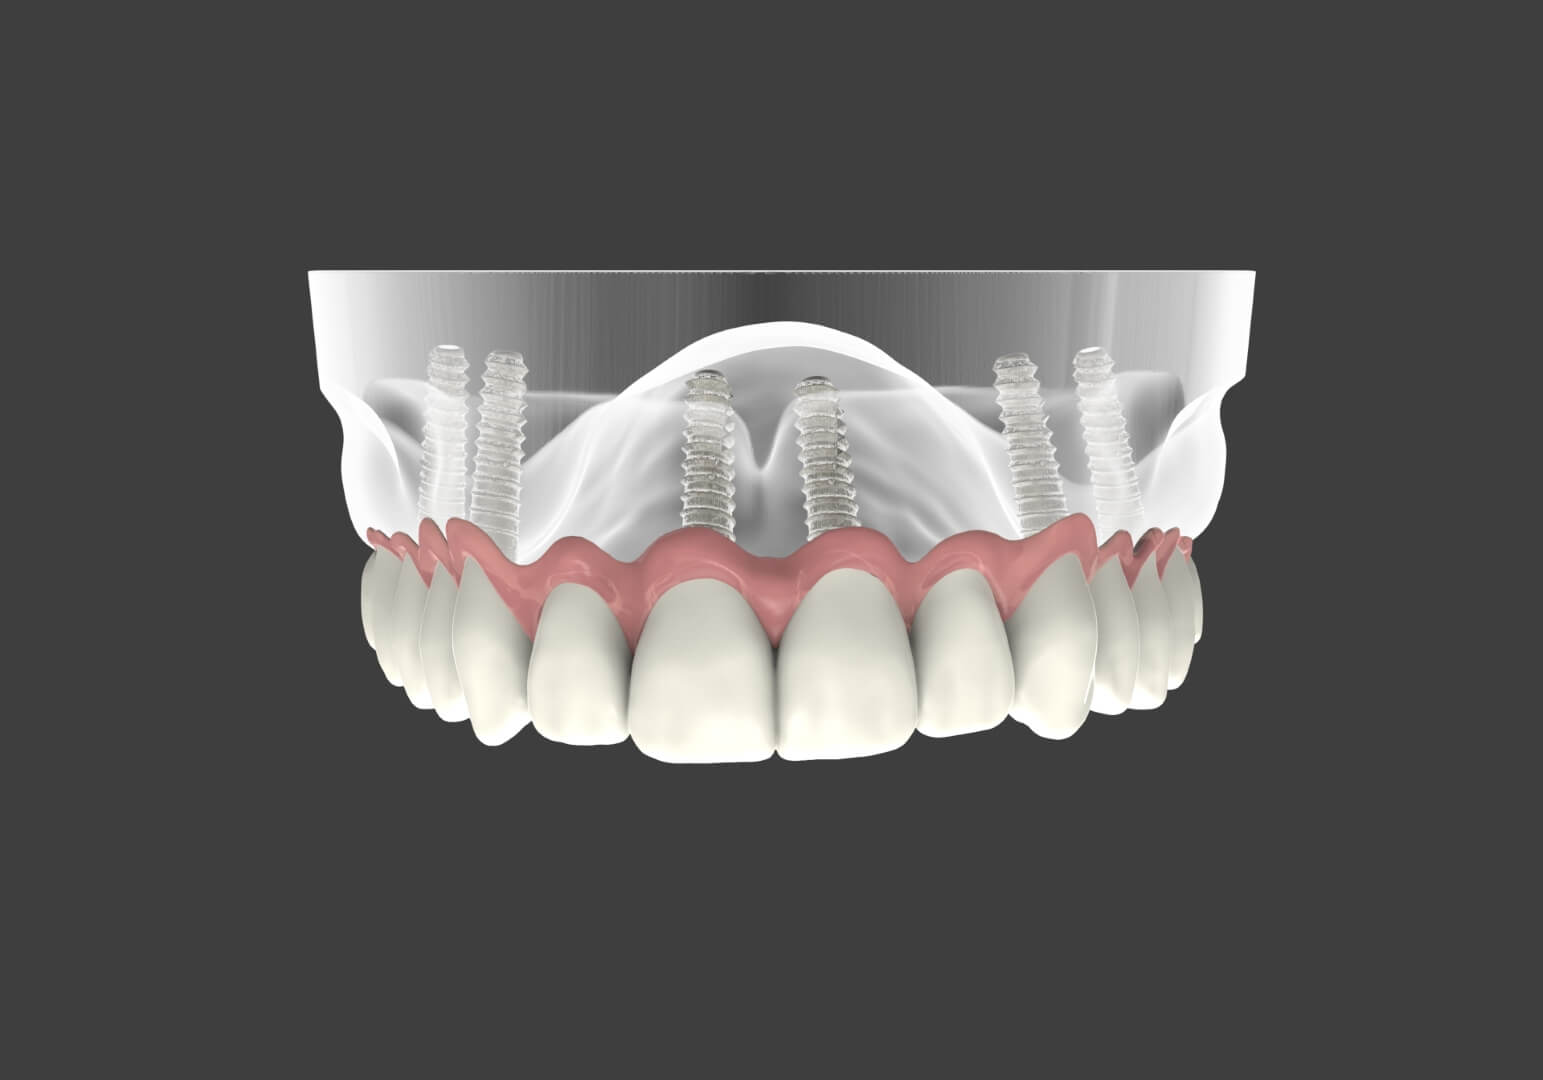 Featured image for “Dental Implants and Oral Surgery”